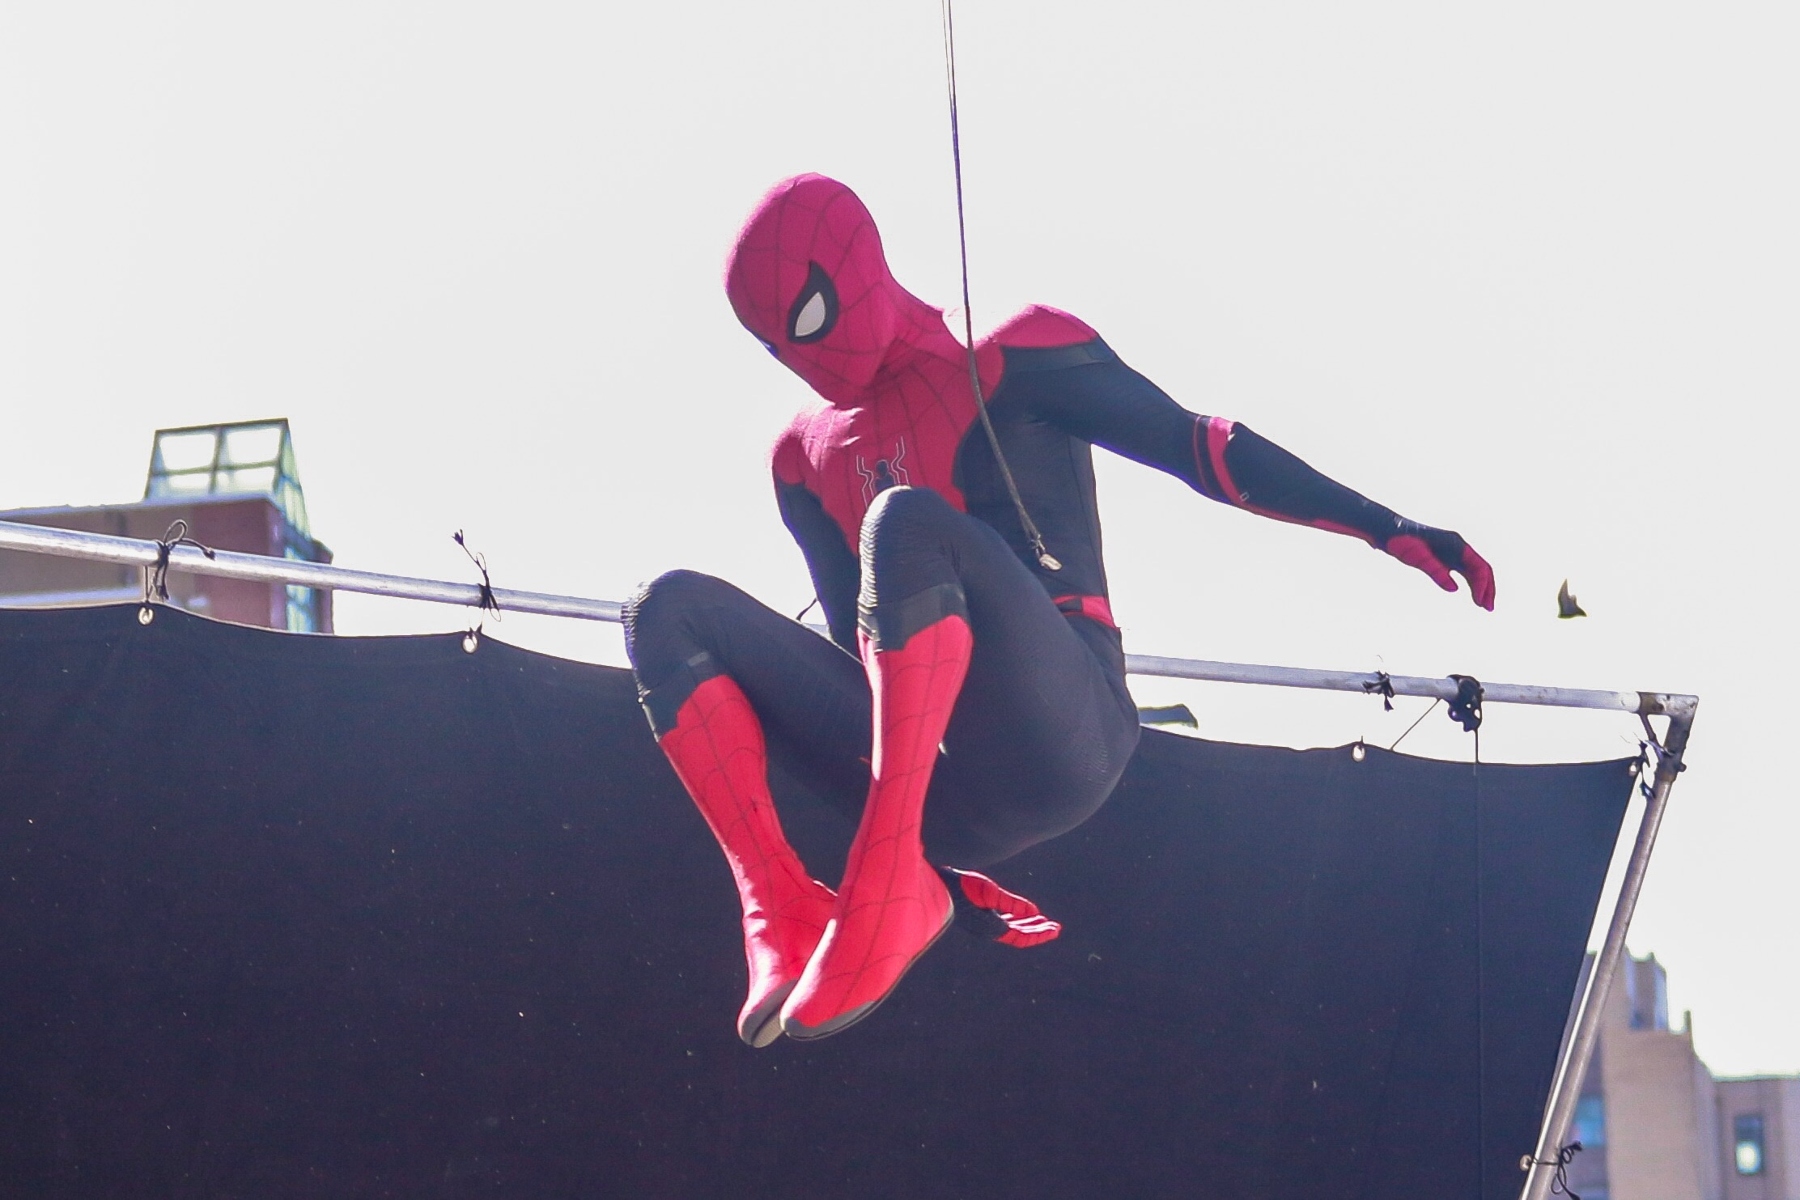 Tom Holland as Spider-Man while filming 'Spider-Man: Far From Home' in New York